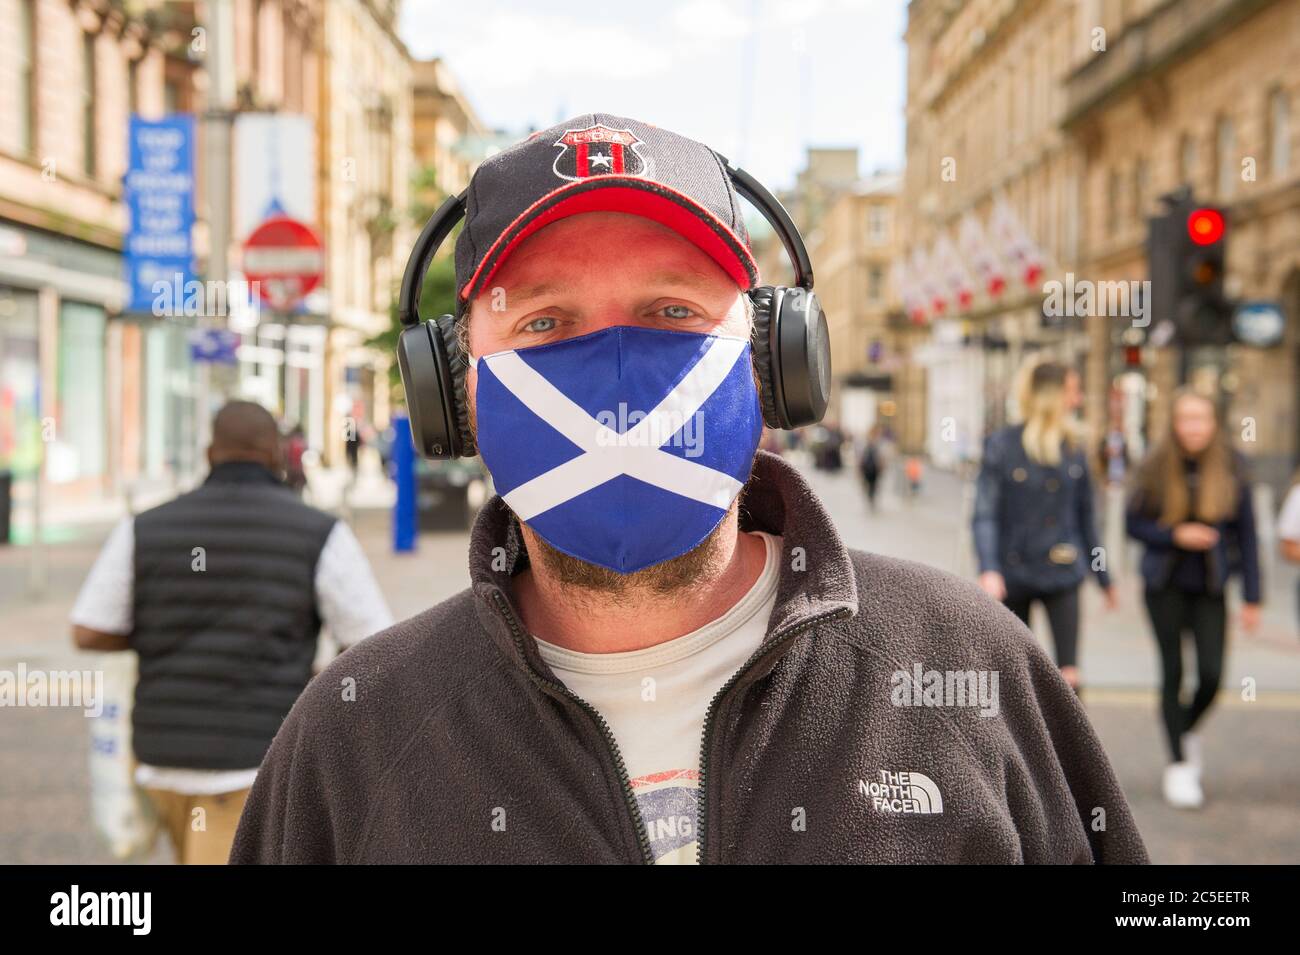 Glasgow, Scotland, UK. 2nd July, 2020. Pictured: A man seen wearing a St Andrews Scotland Flag design face mask. Scenes from Glasgows style mile, Buchanan Street shopping area, where more people are seen wearing face masks or home made face coverings. Nicola Sturgeon announced earlier today that wearing a face covering is to become mandatory in shops from 10th July next week. Face coverings are already mandatory when taking public transport in a bid to slow down the spread of coronavirus. Credit: Colin Fisher/Alamy Live News Stock Photo